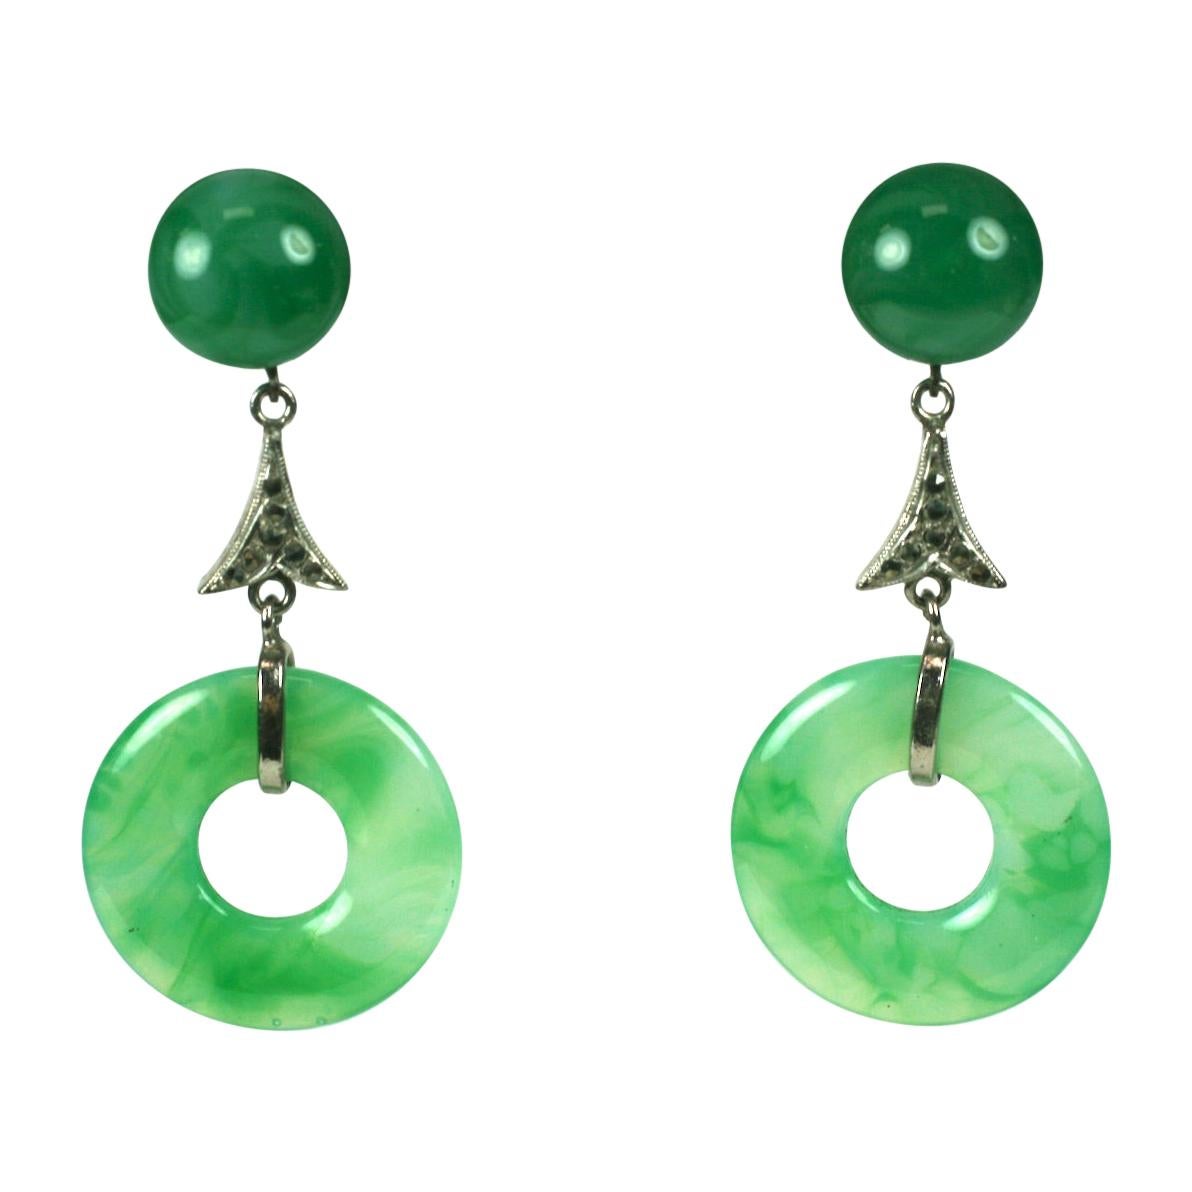 French Art Deco Chinoiserie Faux Jade Drop Earclips